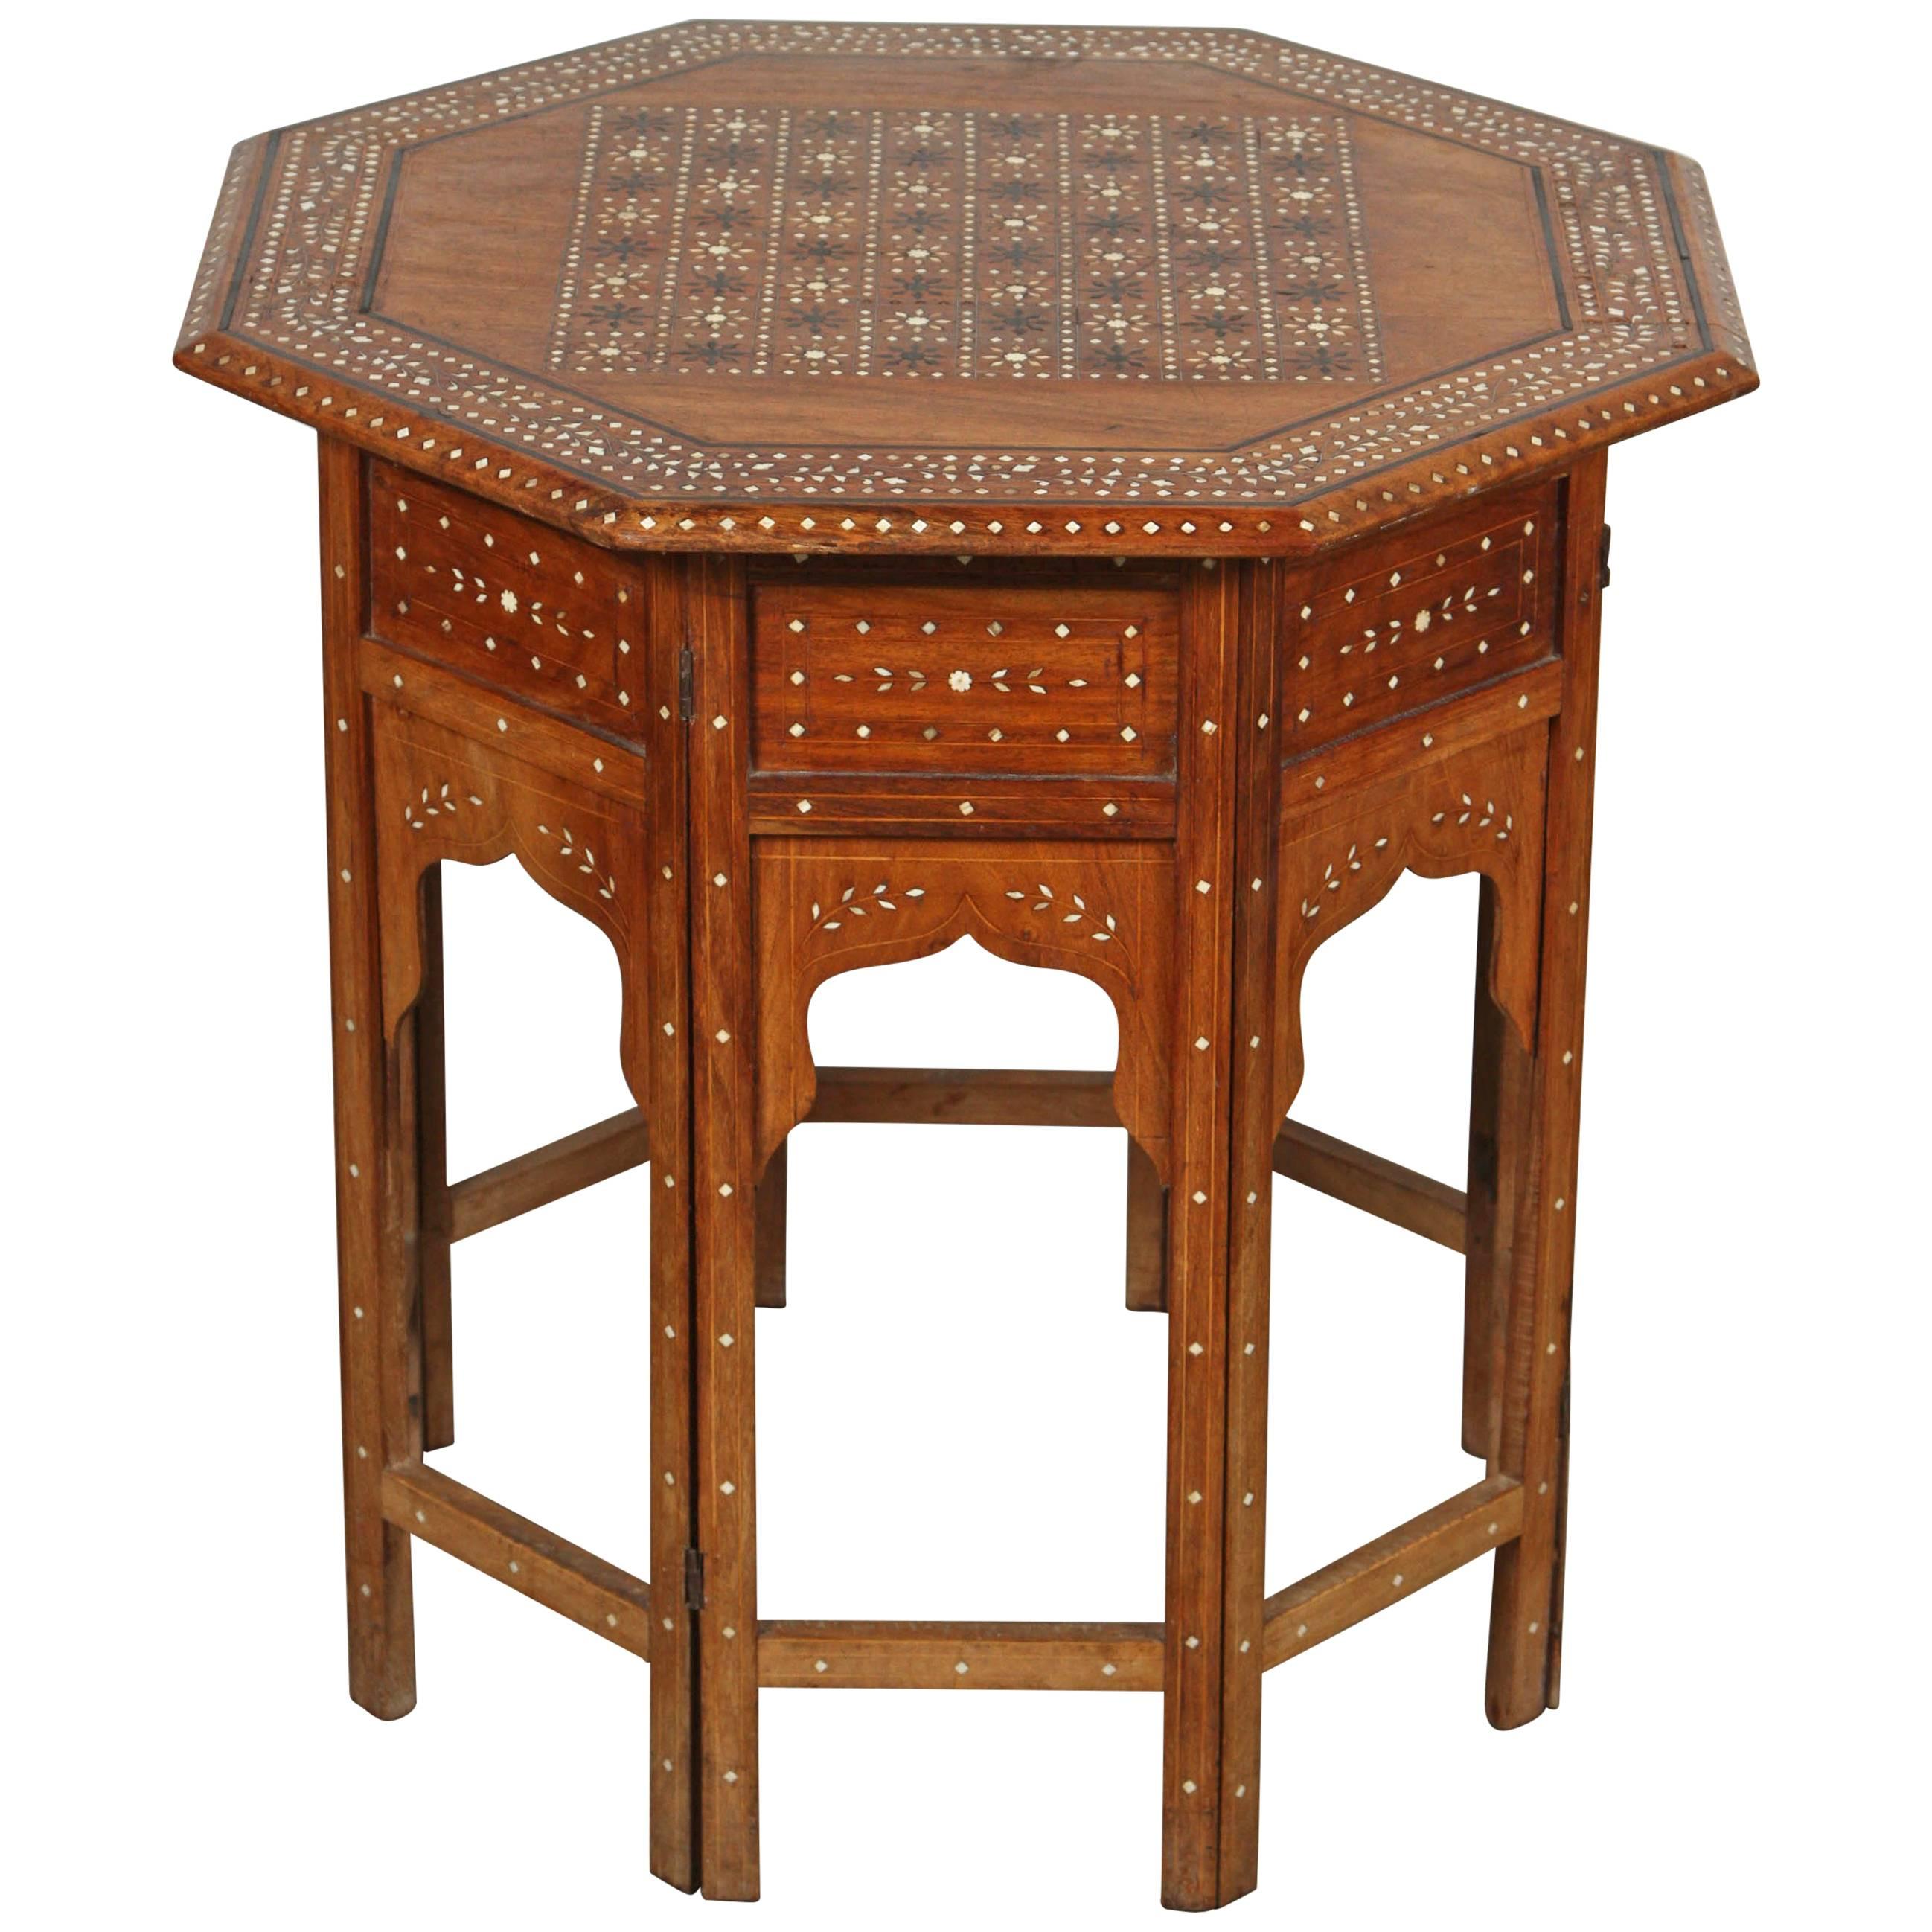 Anglo-Indian Octagonal Game Chest Table